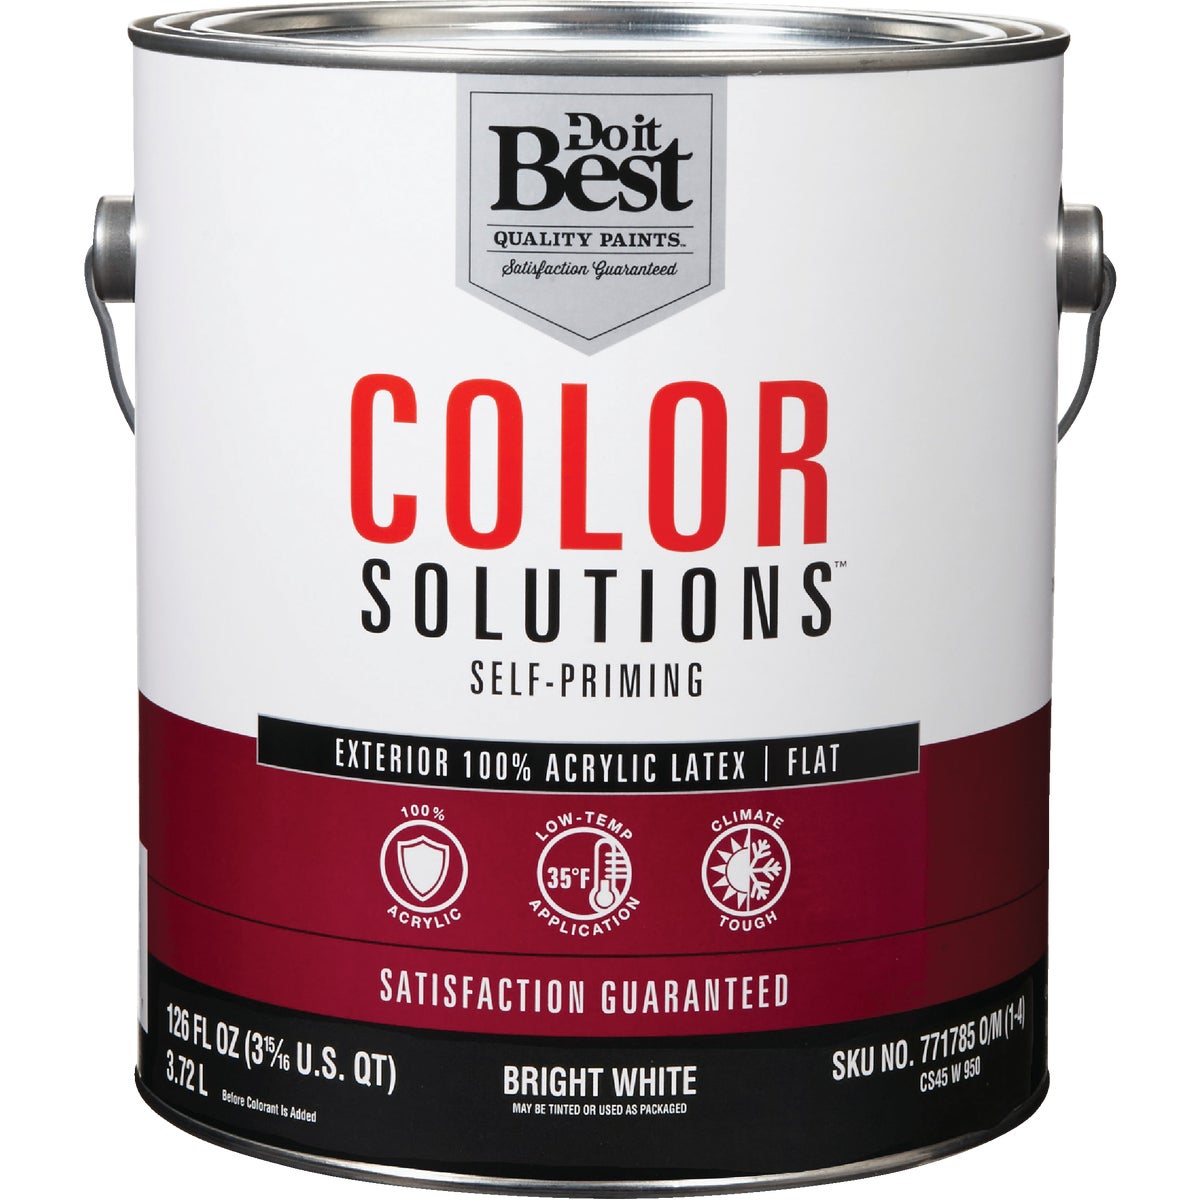 Do it Best Color Solutions 100% Acrylic Latex Self-Priming Flat Exterior House Paint, Bright White, 1 Gal.